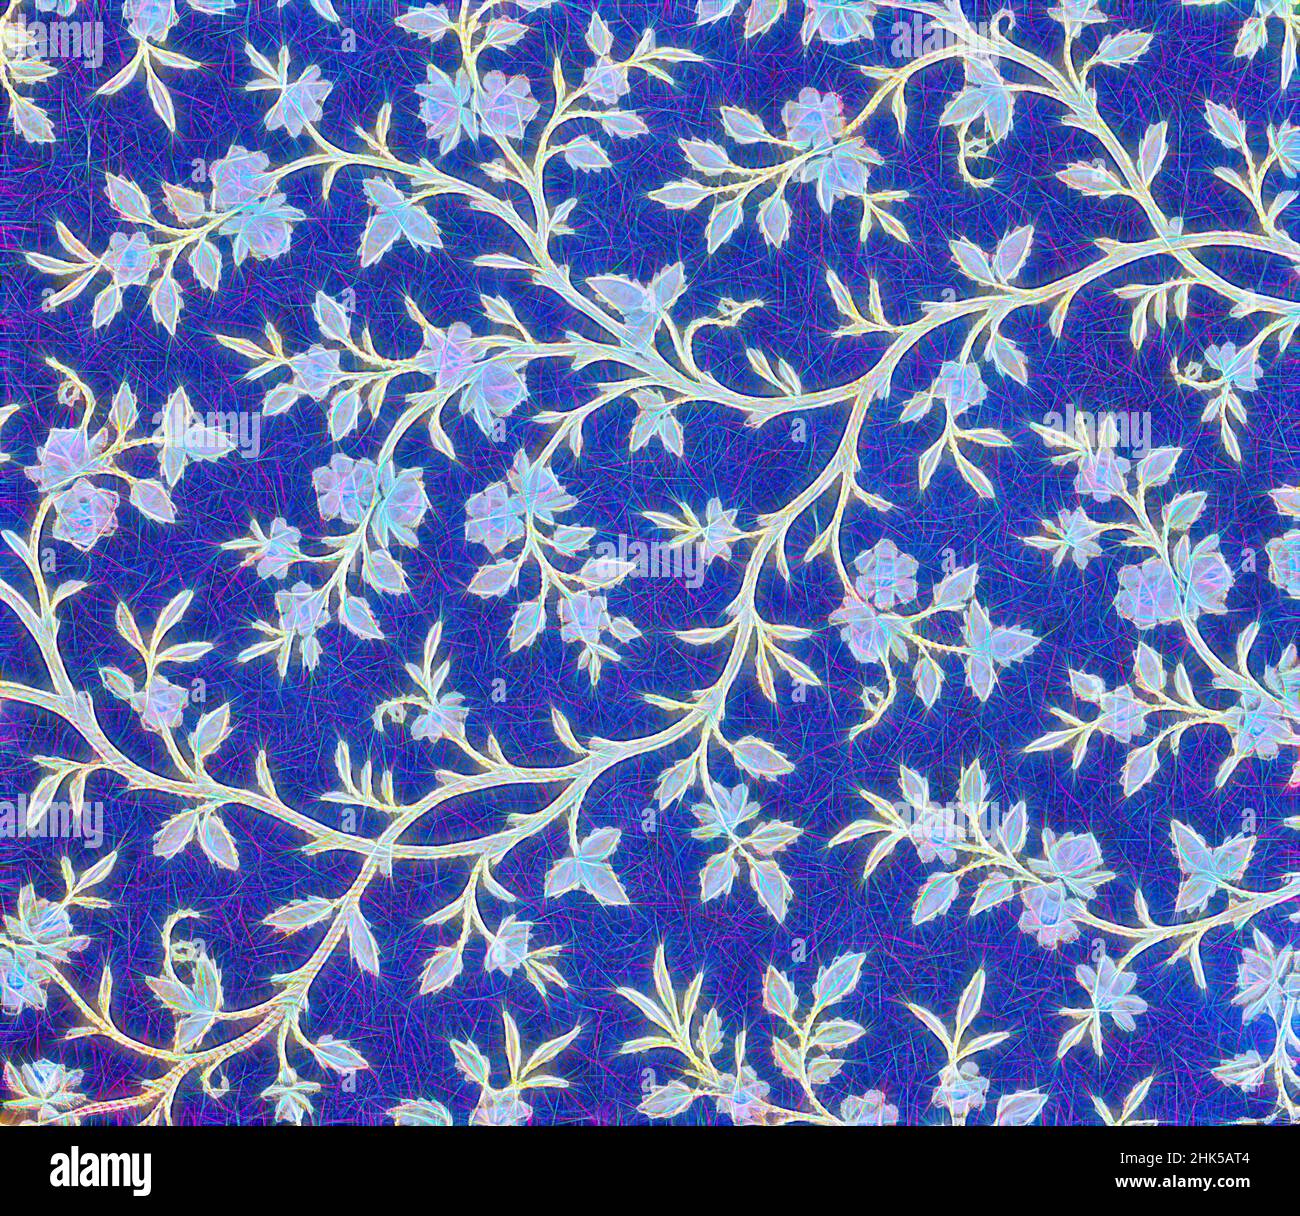 Inspired by Wallpaper, Paper, ca. 1870-1890, 19 3/4 x 25 1/2 in., 50.2 x 64.8 cm, decorative, floral, flower, pattern, vines, Reimagined by Artotop. Classic art reinvented with a modern twist. Design of warm cheerful glowing of brightness and light ray radiance. Photography inspired by surrealism and futurism, embracing dynamic energy of modern technology, movement, speed and revolutionize culture Stock Photo